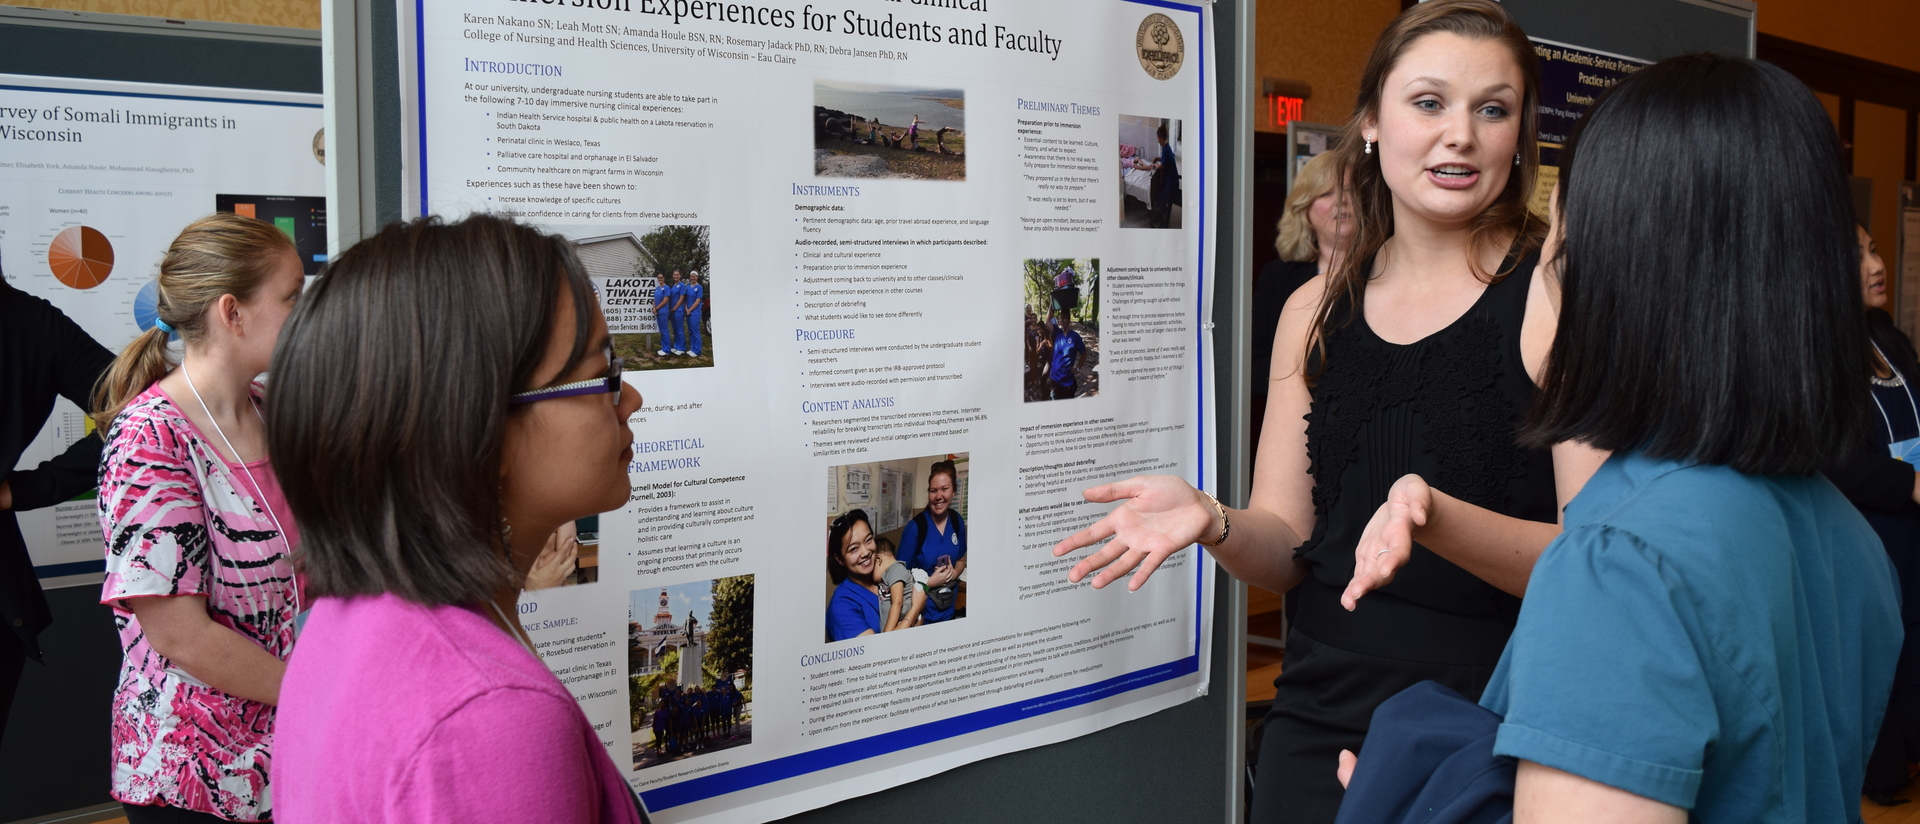 Last year Karen Nakano and Leah Mott discussed their research.